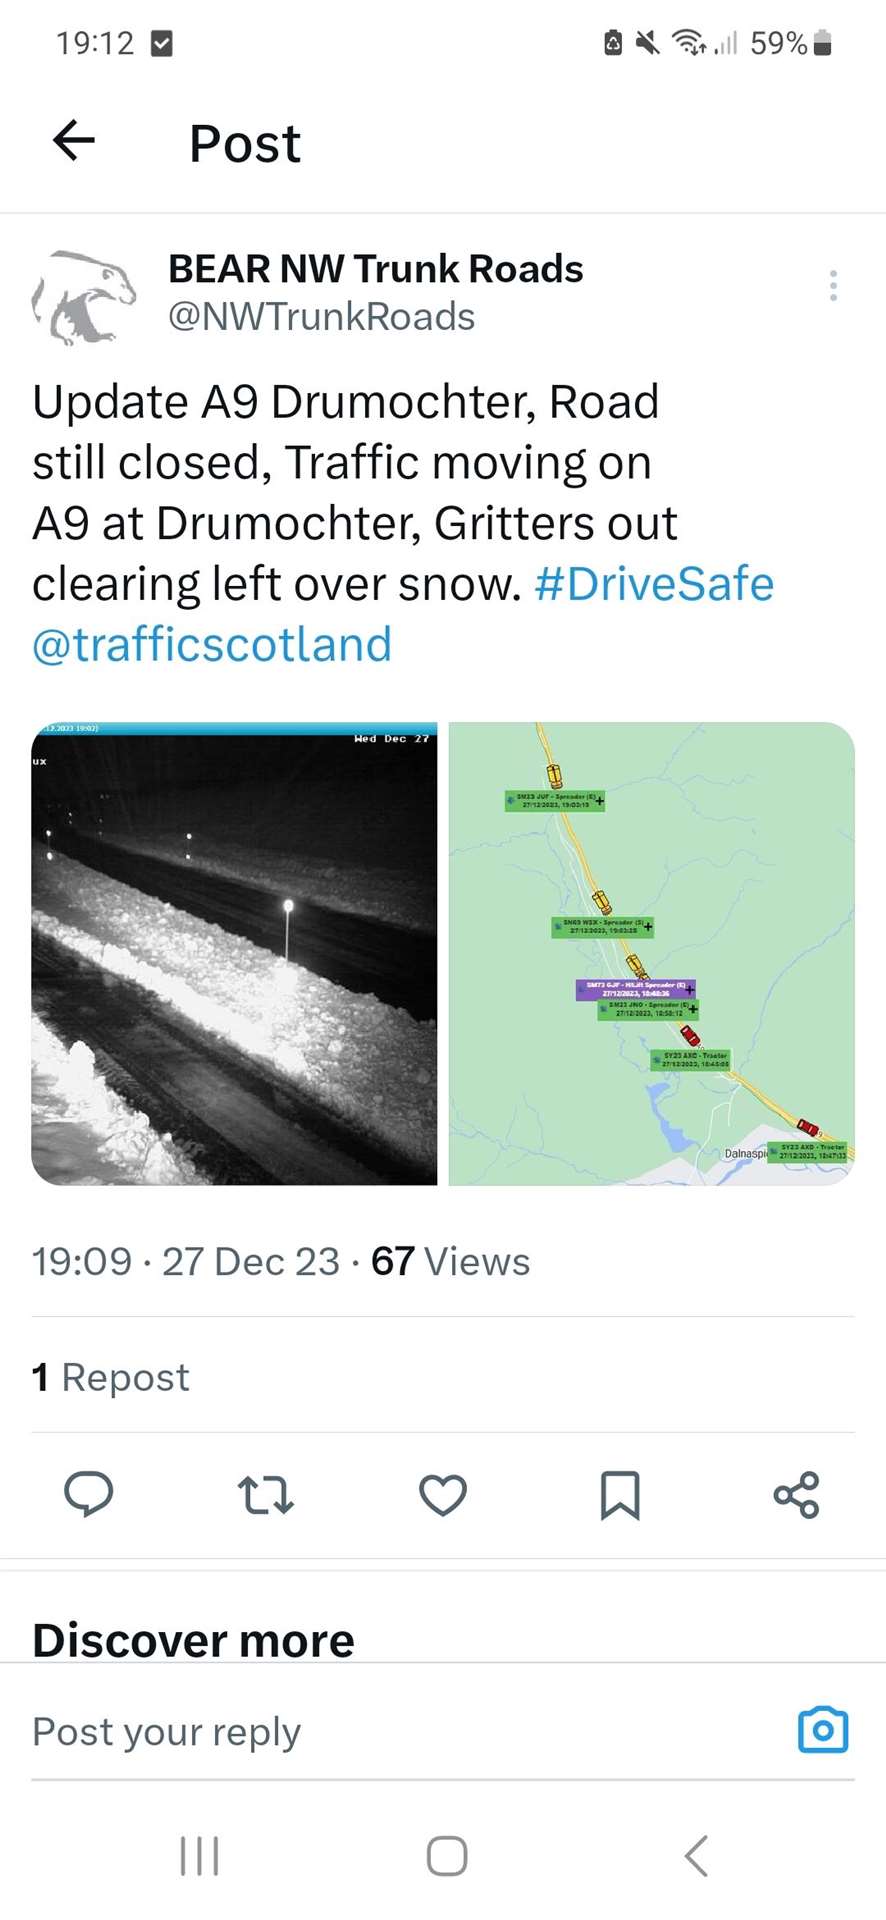 Latest pictures and updates from BEAR Scotland